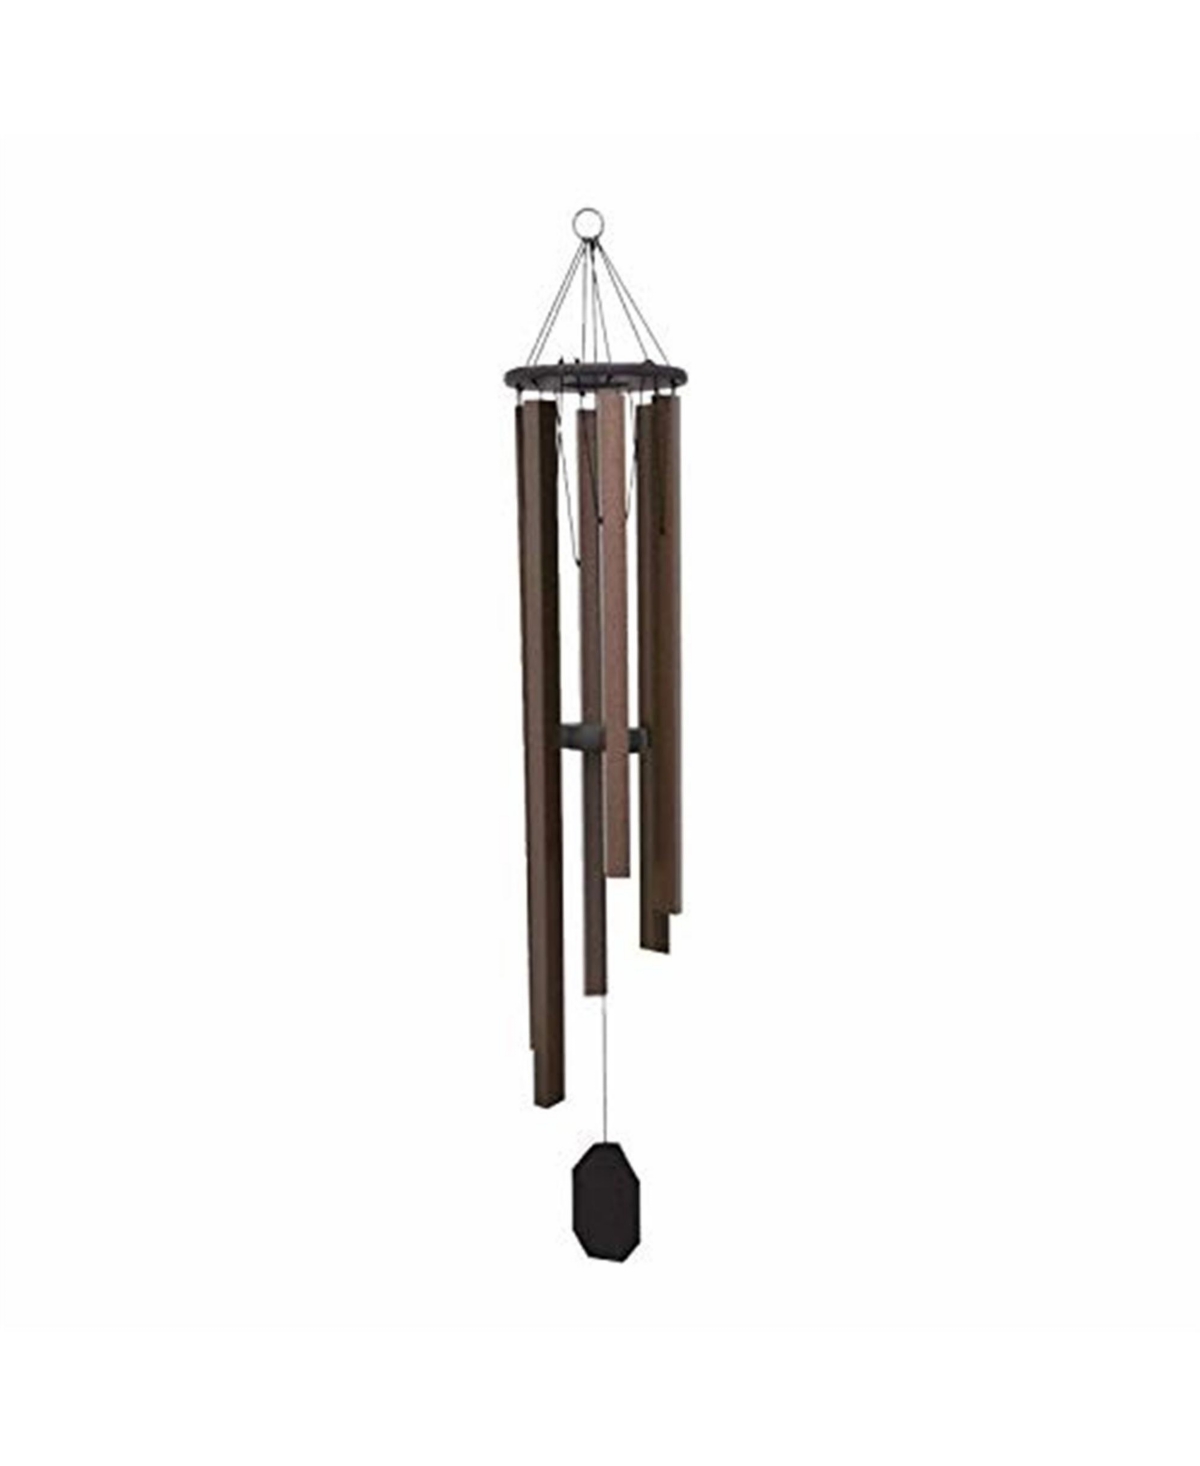 64 Dream Maker Wind Chime - Amish Handcrafted Country Chime - Brown